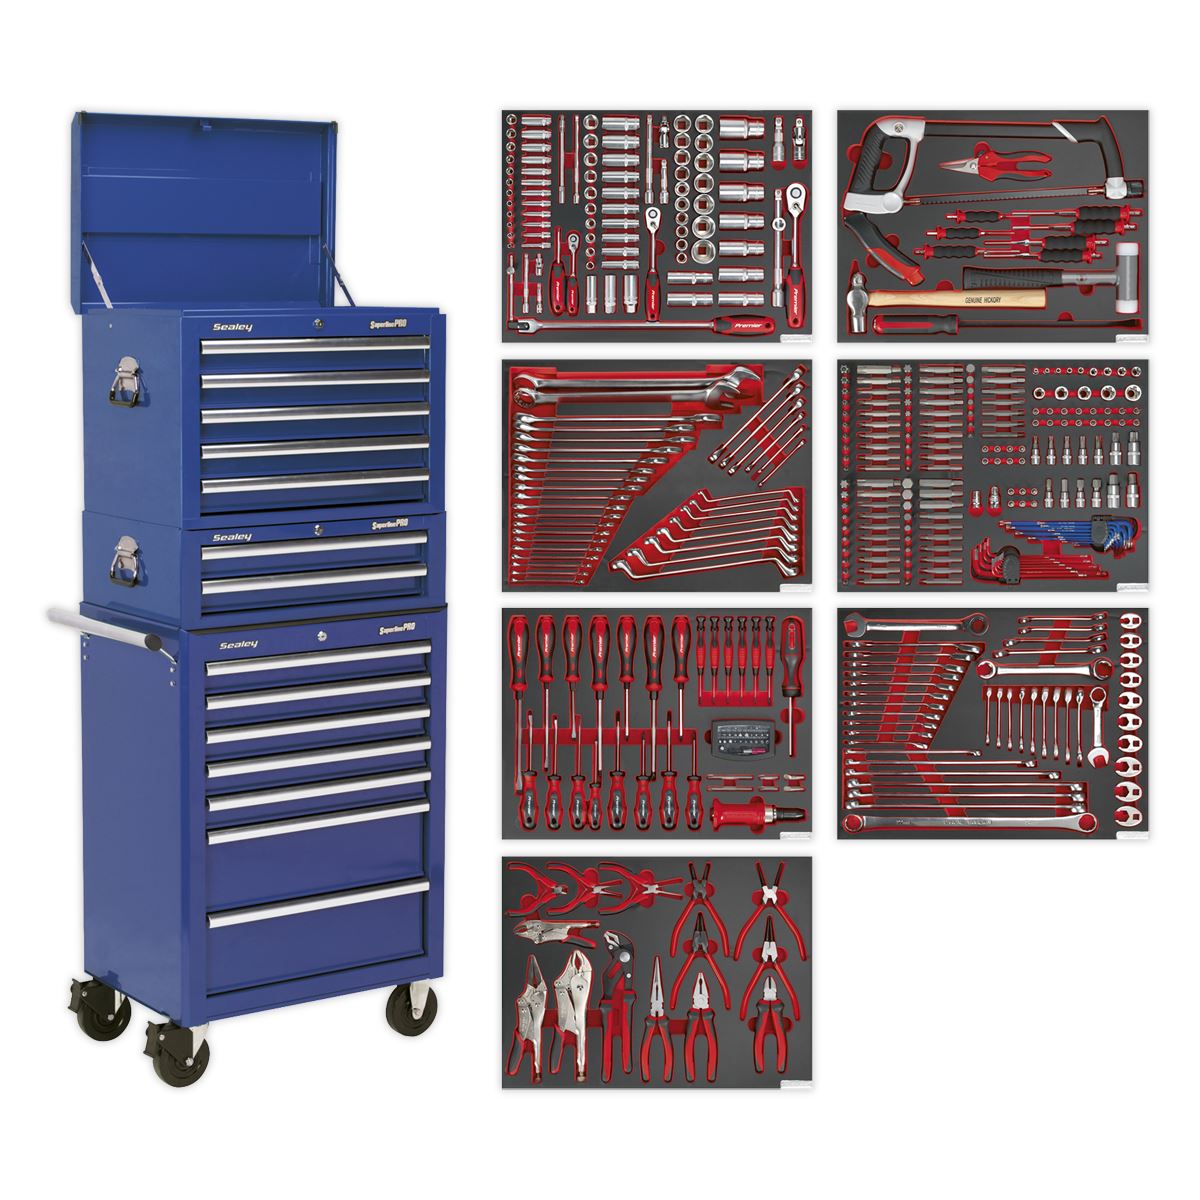 Sealey Superline Pro Tool Chest Combination 14 Drawer with Ball-Bearing Slides - Blue & 446pc Tool Kit